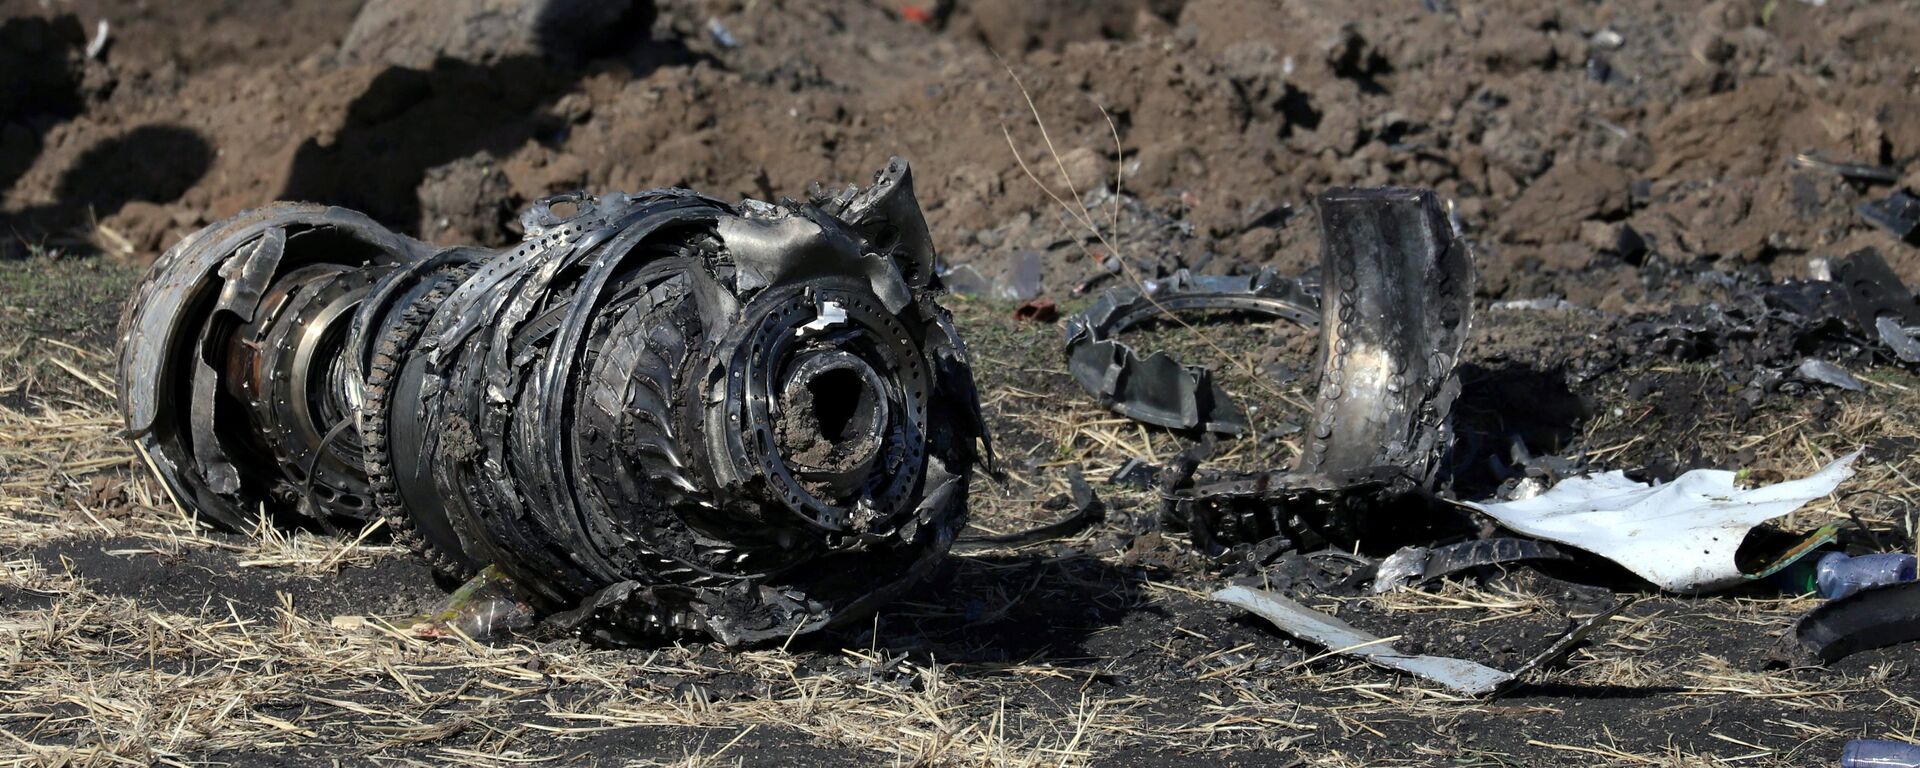 Engine parts are seen at the scene of the Ethiopian Airlines Flight ET 302 plane crash, near the town of Bishoftu, southeast of Addis Ababa, Ethiopia March 11, 2019 - Sputnik International, 1920, 04.04.2019